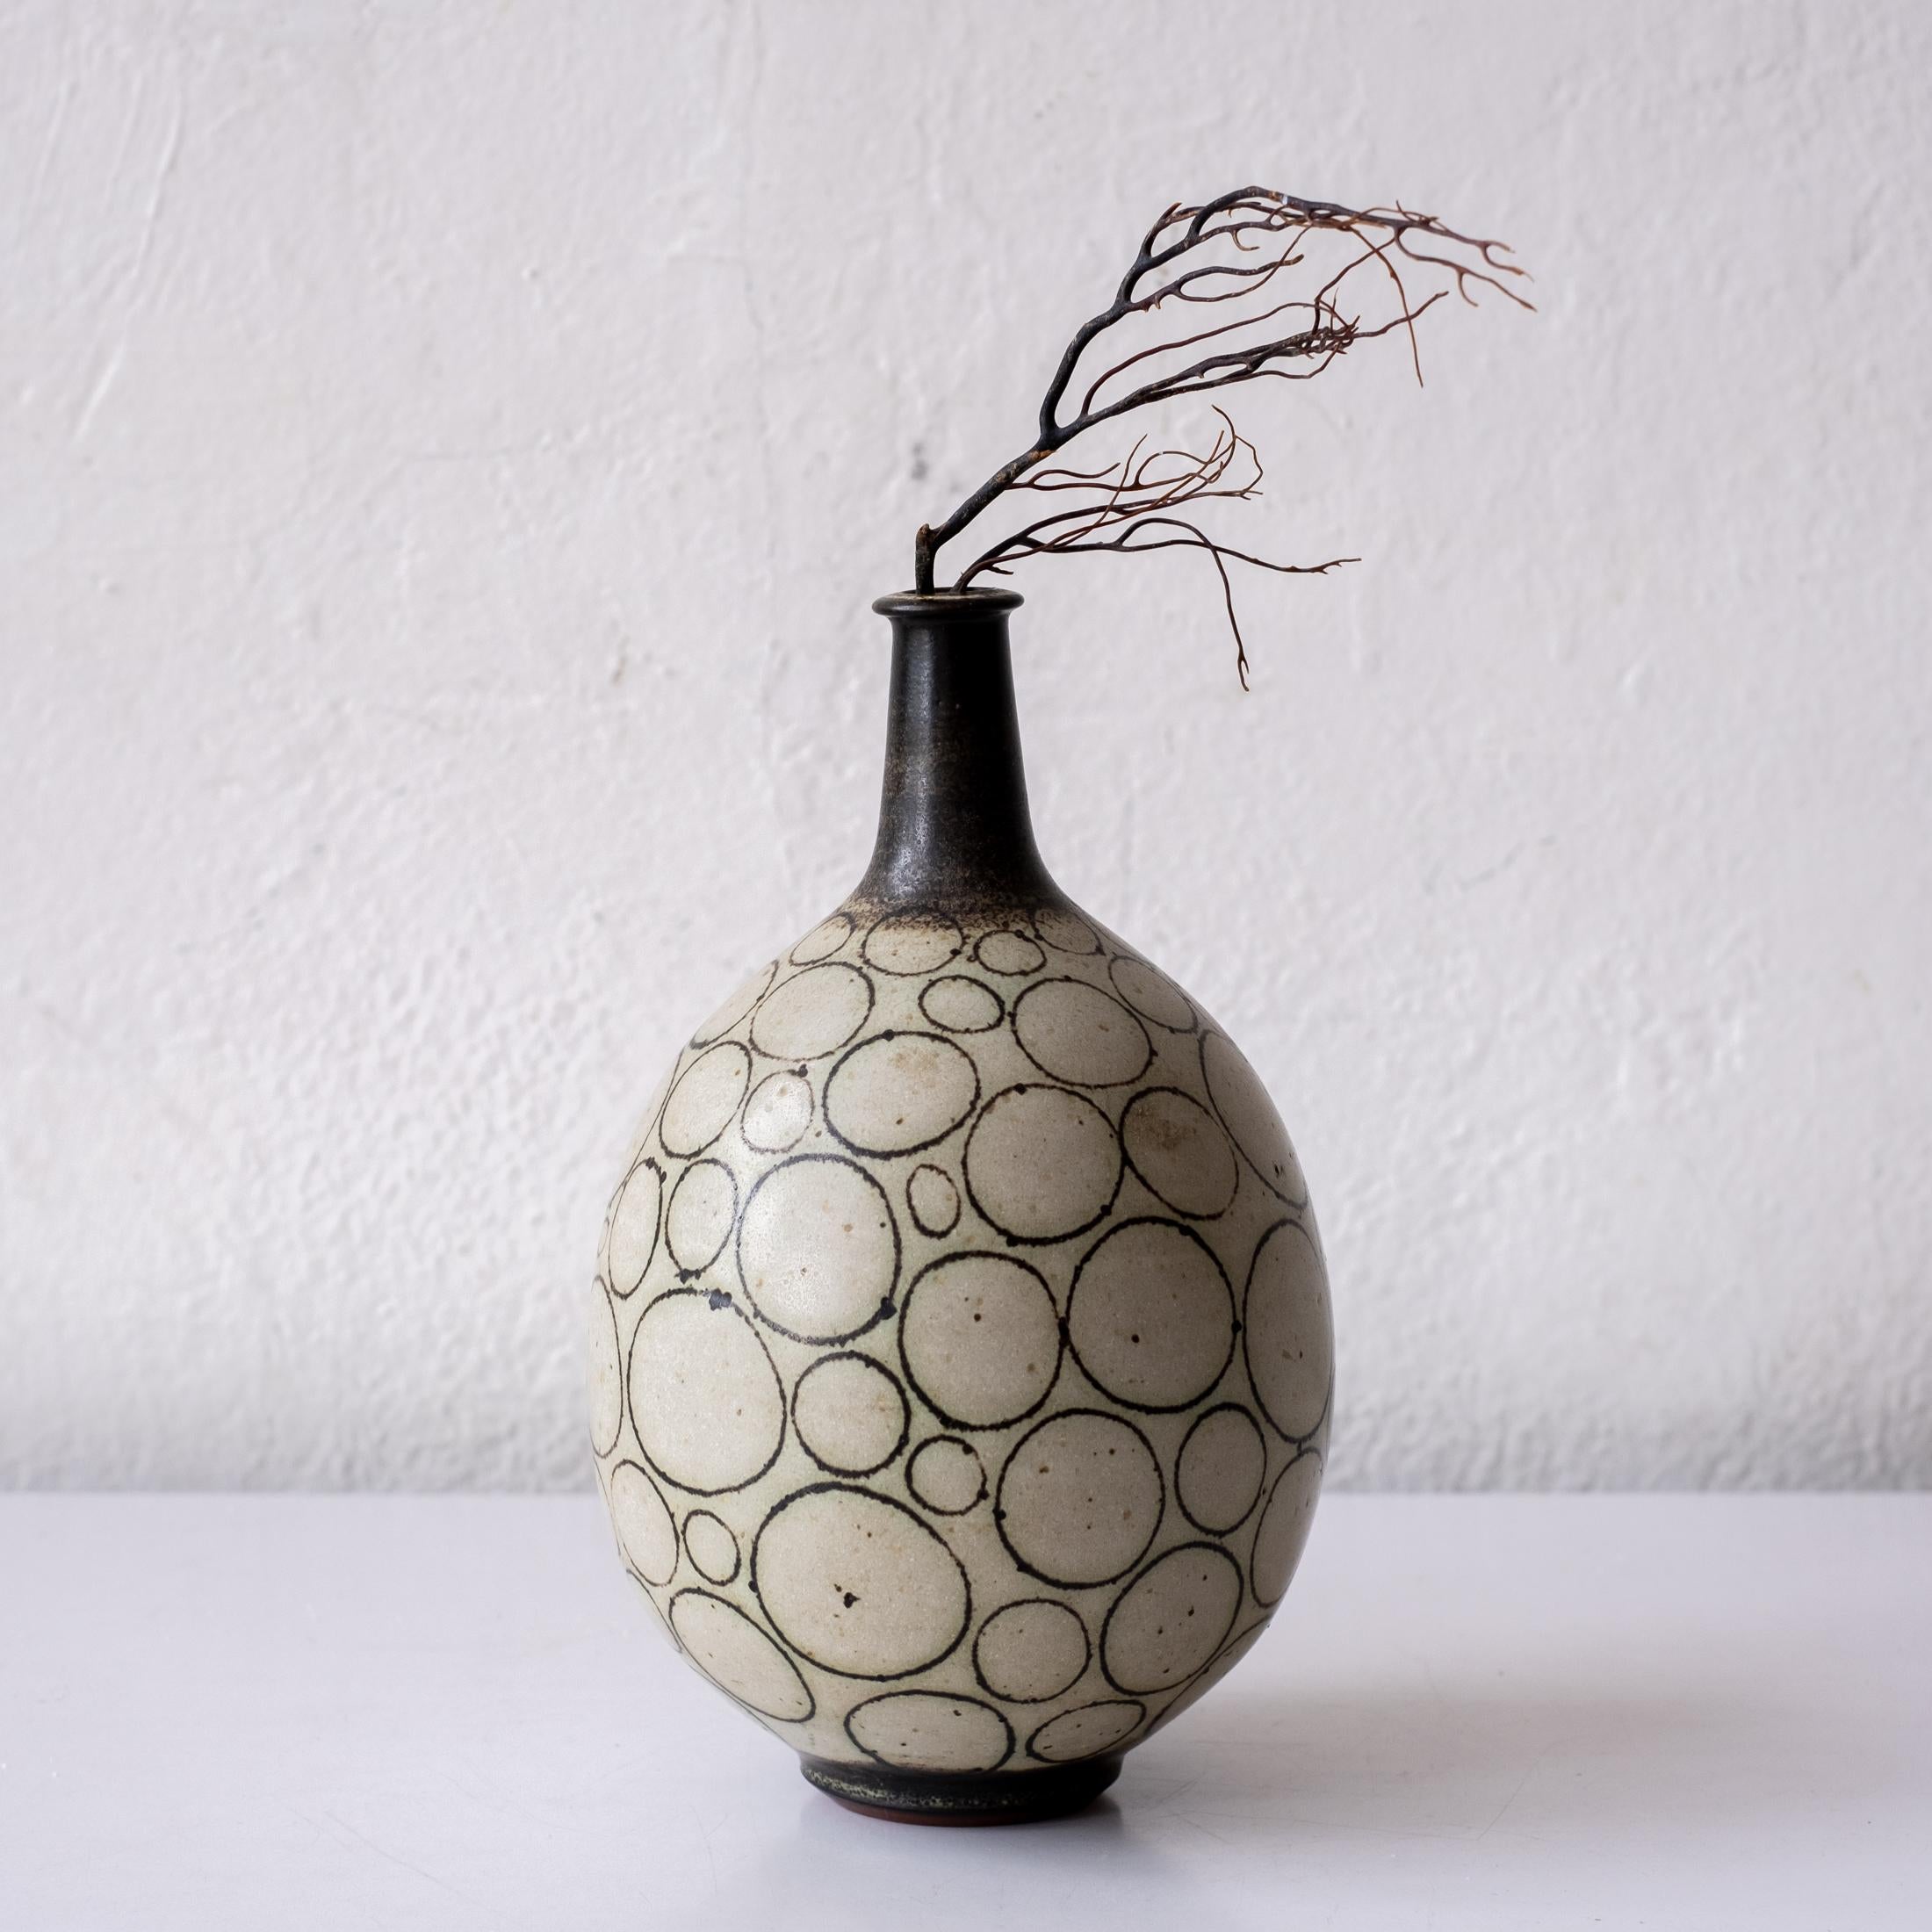 Beautiful Harrison McIntosh ceramic vase with a classic geometric surface design. Signed with the artist's mark and label. 

Harrison McIntosh (11 September 1914 – 21 January 2016) was an American ceramic artist. He was an exponent of the